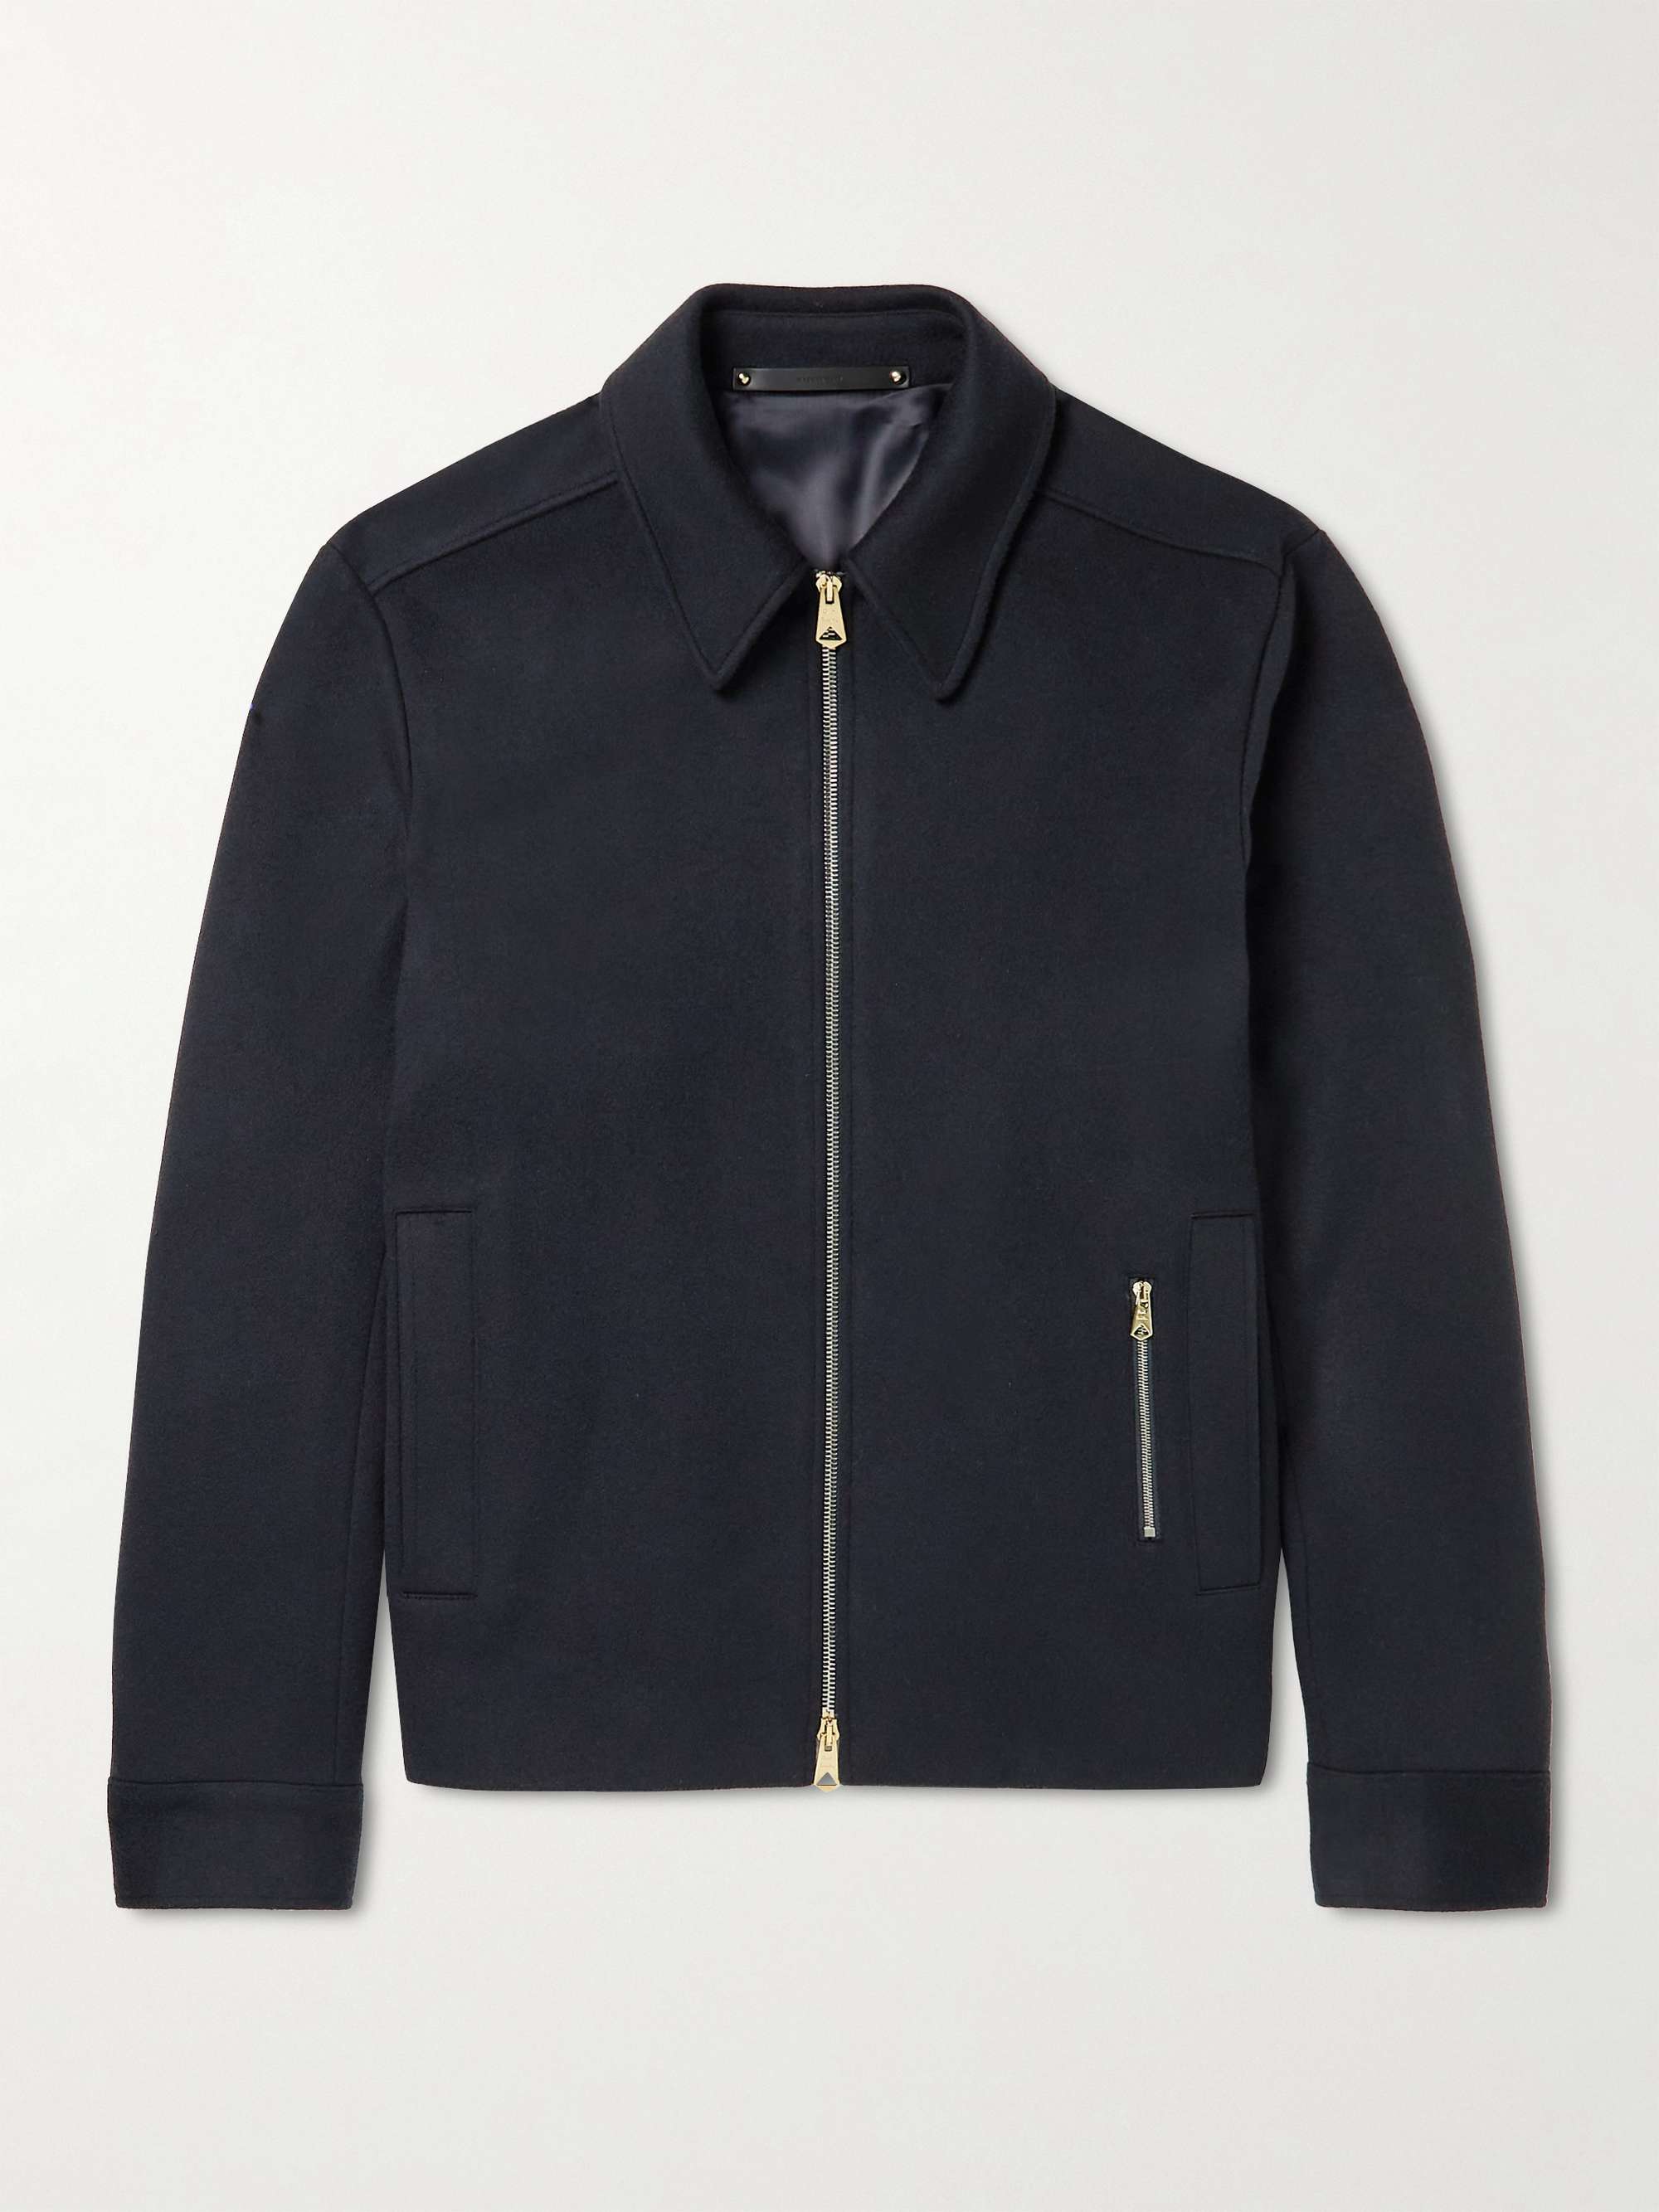 PAUL SMITH Wool and Cashmere-Blend Jacket